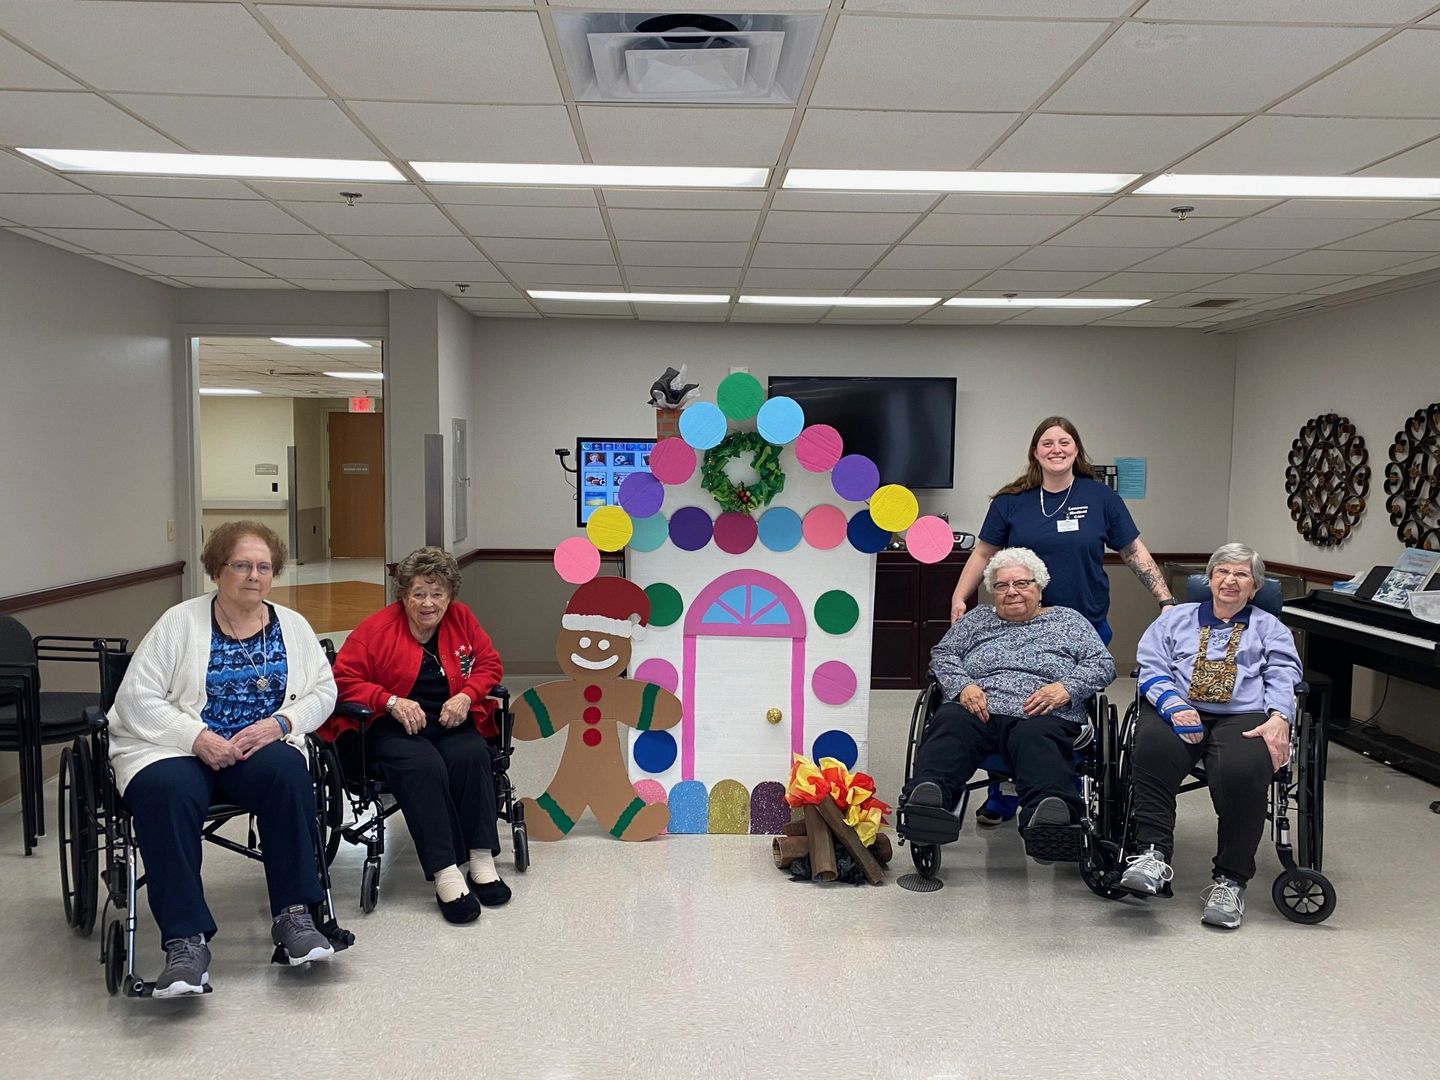 Elders and staff member posing next to ginger bread house display at Lenawee Medical Care Facility in Adrian, MI